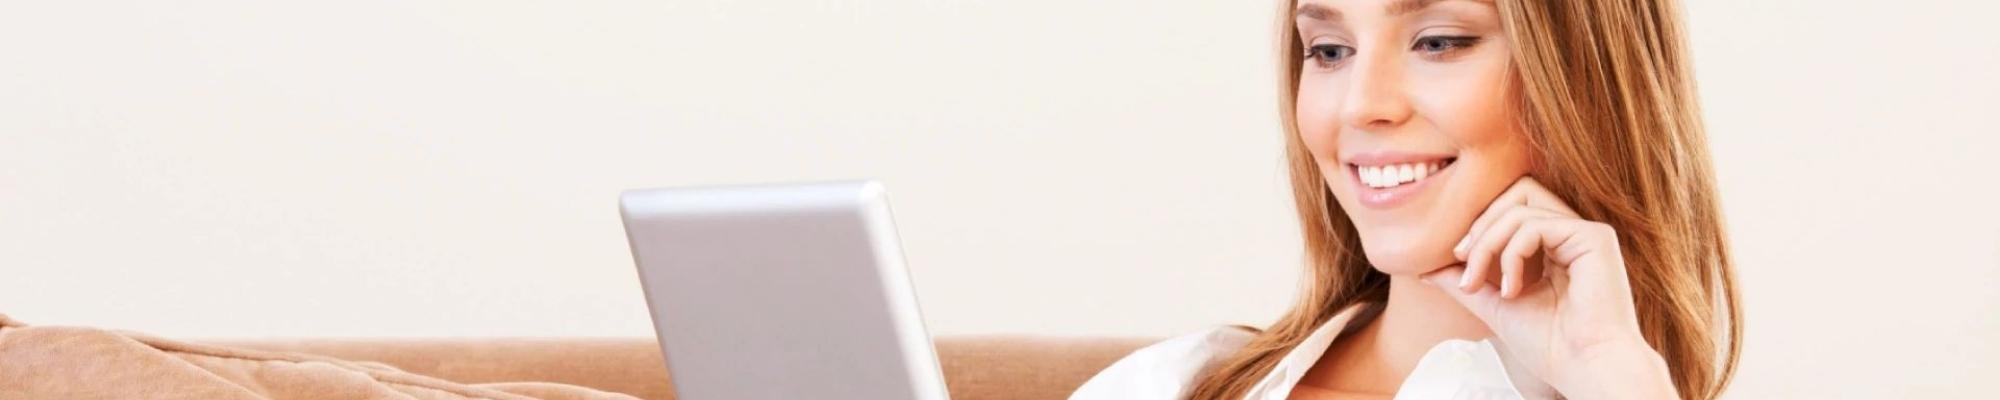 woman-on-tablet-banner-2000x400